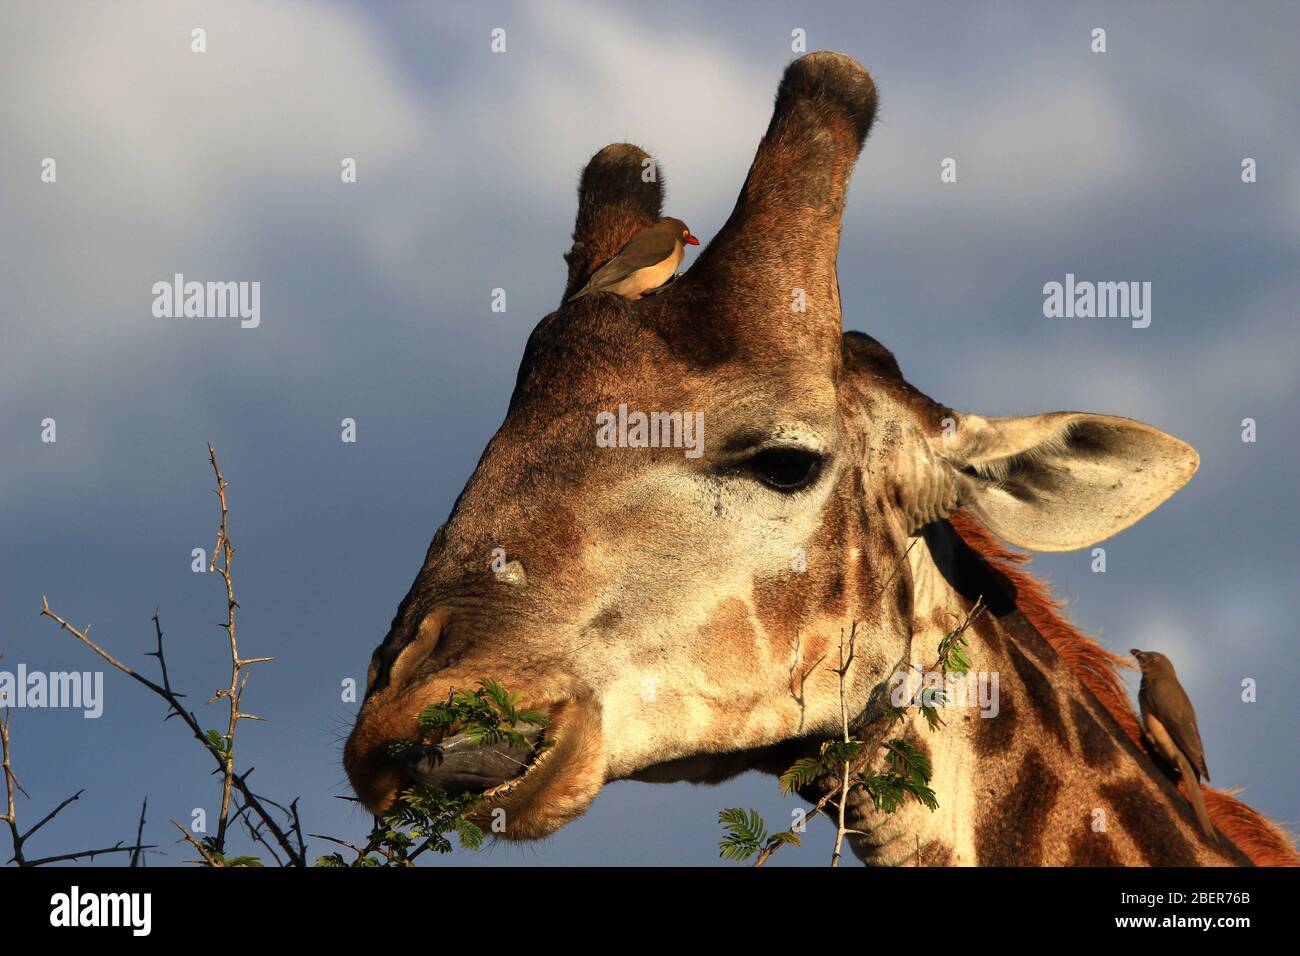 Accompanied by two red-billed oxpeckers, a giraffe grazes on acacia leaves (South Africa) Stock Photo